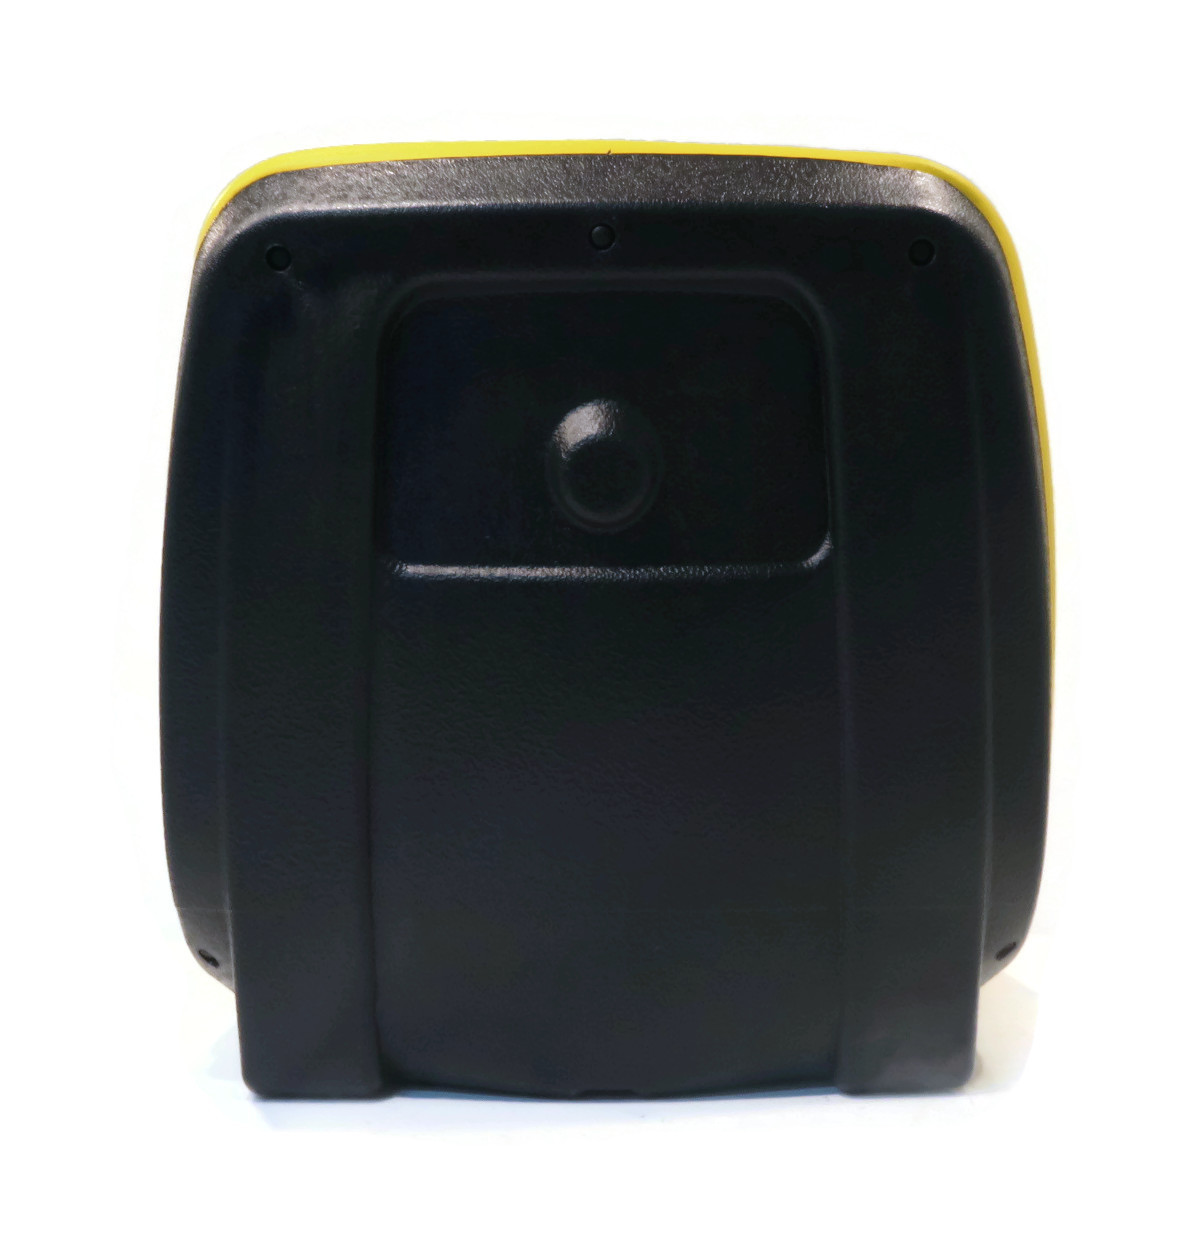 The ROP Shop | (2) Yellow High Back Seat For John Deere LVA10029 AM129969 AM129970 AM133476 - image 4 of 5